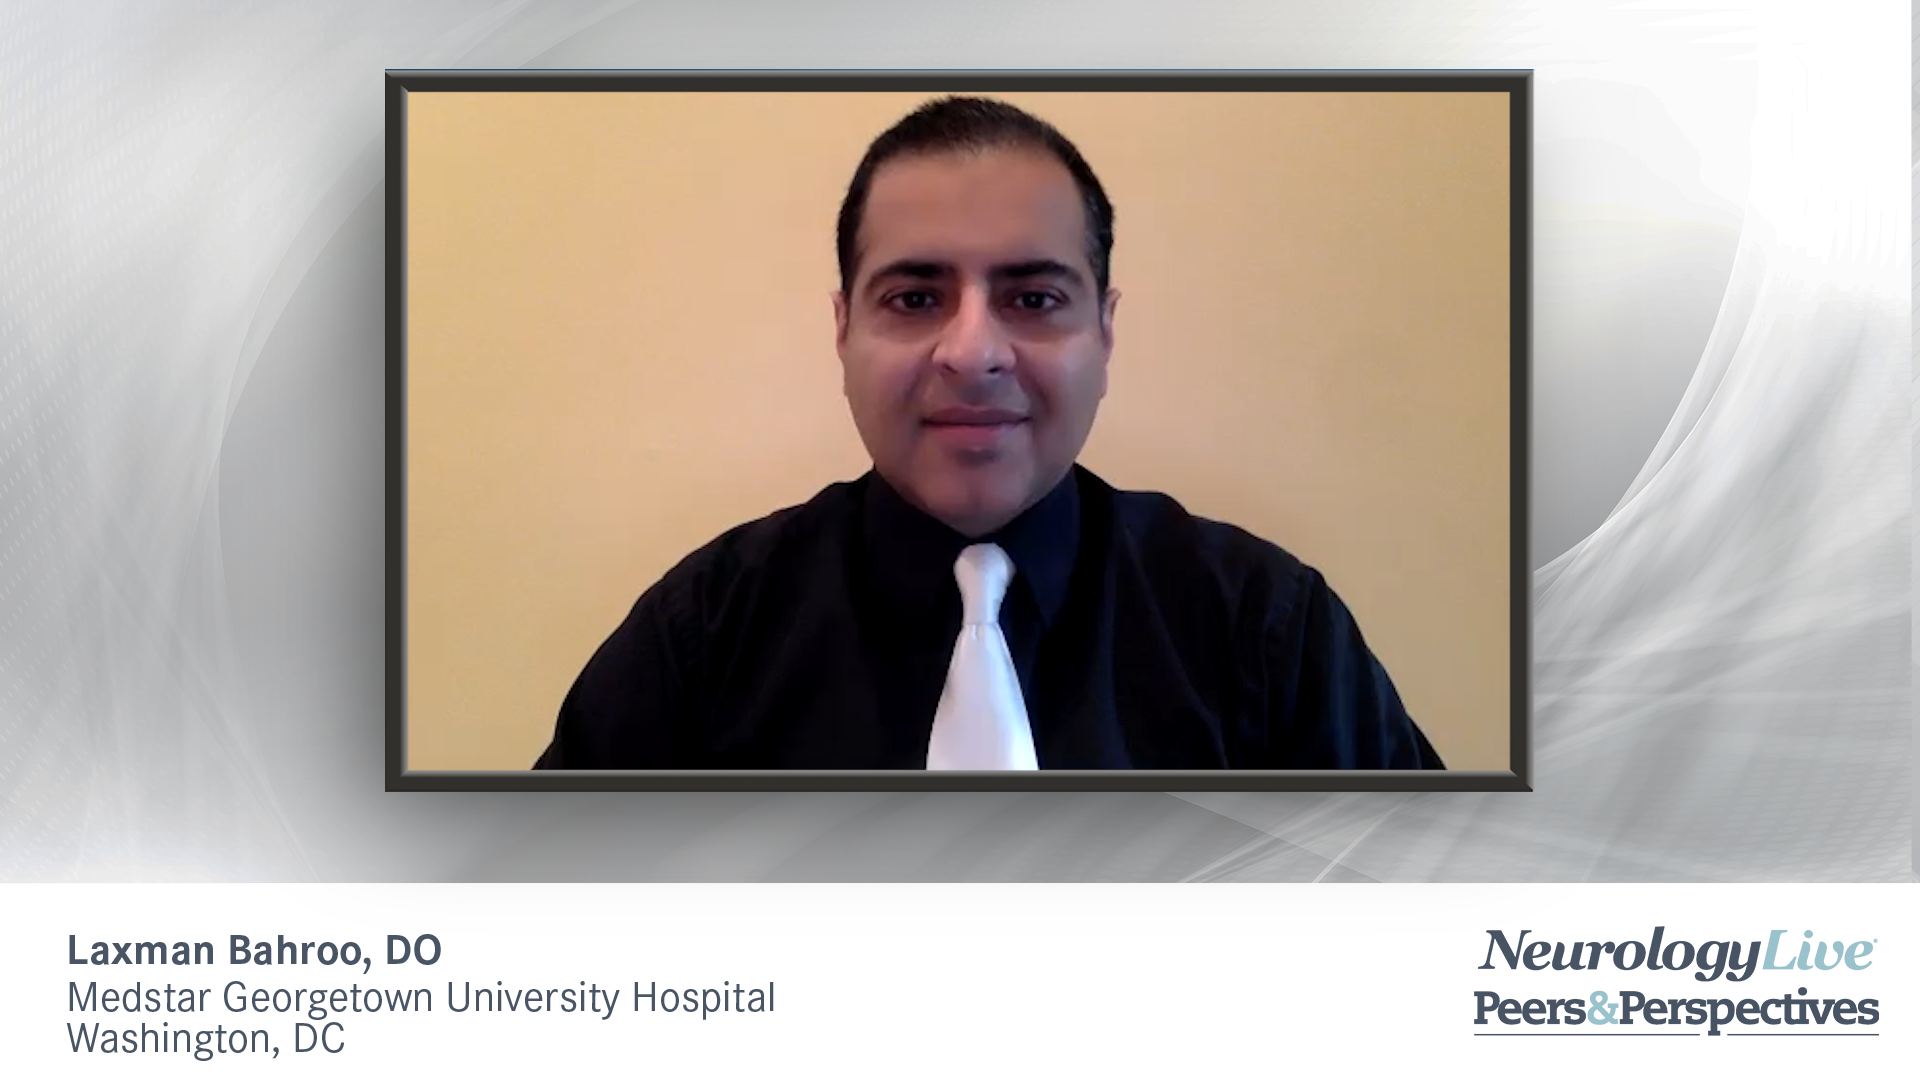 Role of Patient Education for SubQ and Pen-Based OFF Episode Therapies